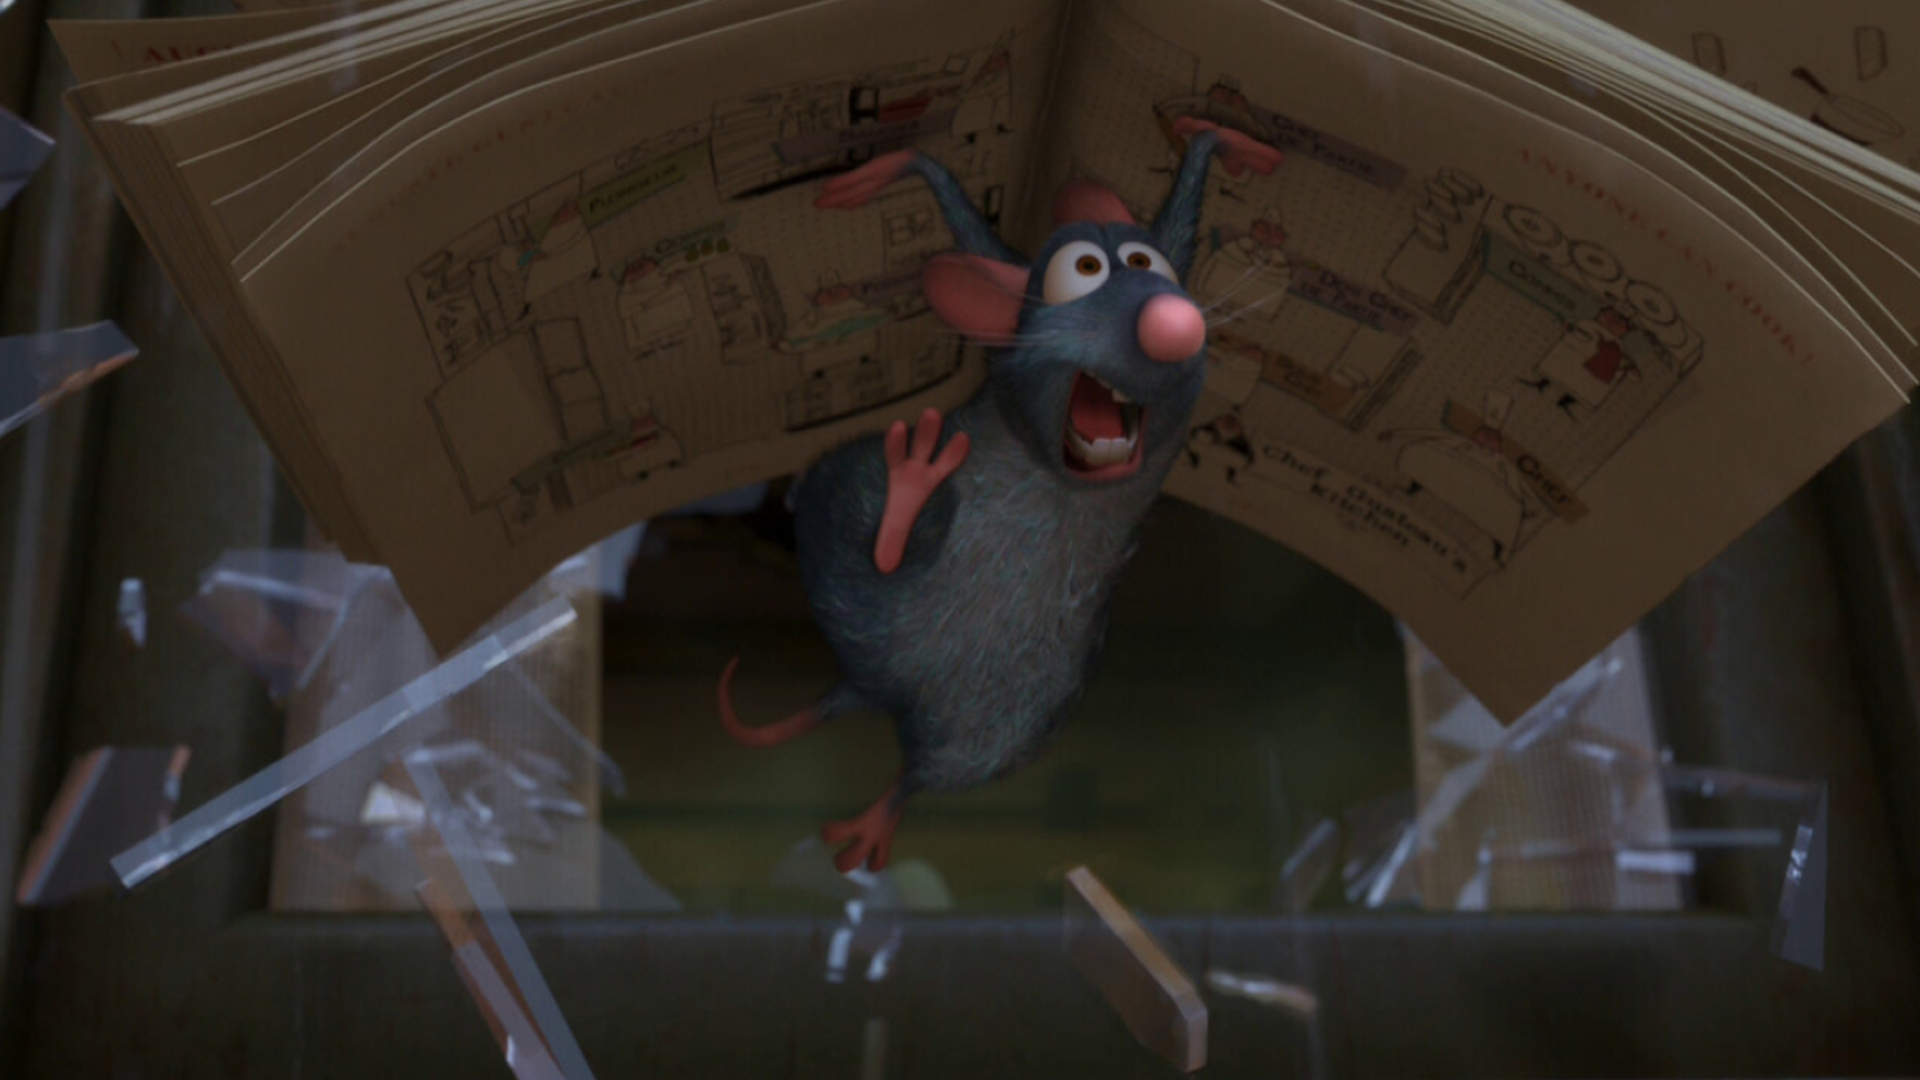 Ratatouille: Remy, A bluish-gray rat from Paris with a passion for food. 1920x1080 Full HD Wallpaper.